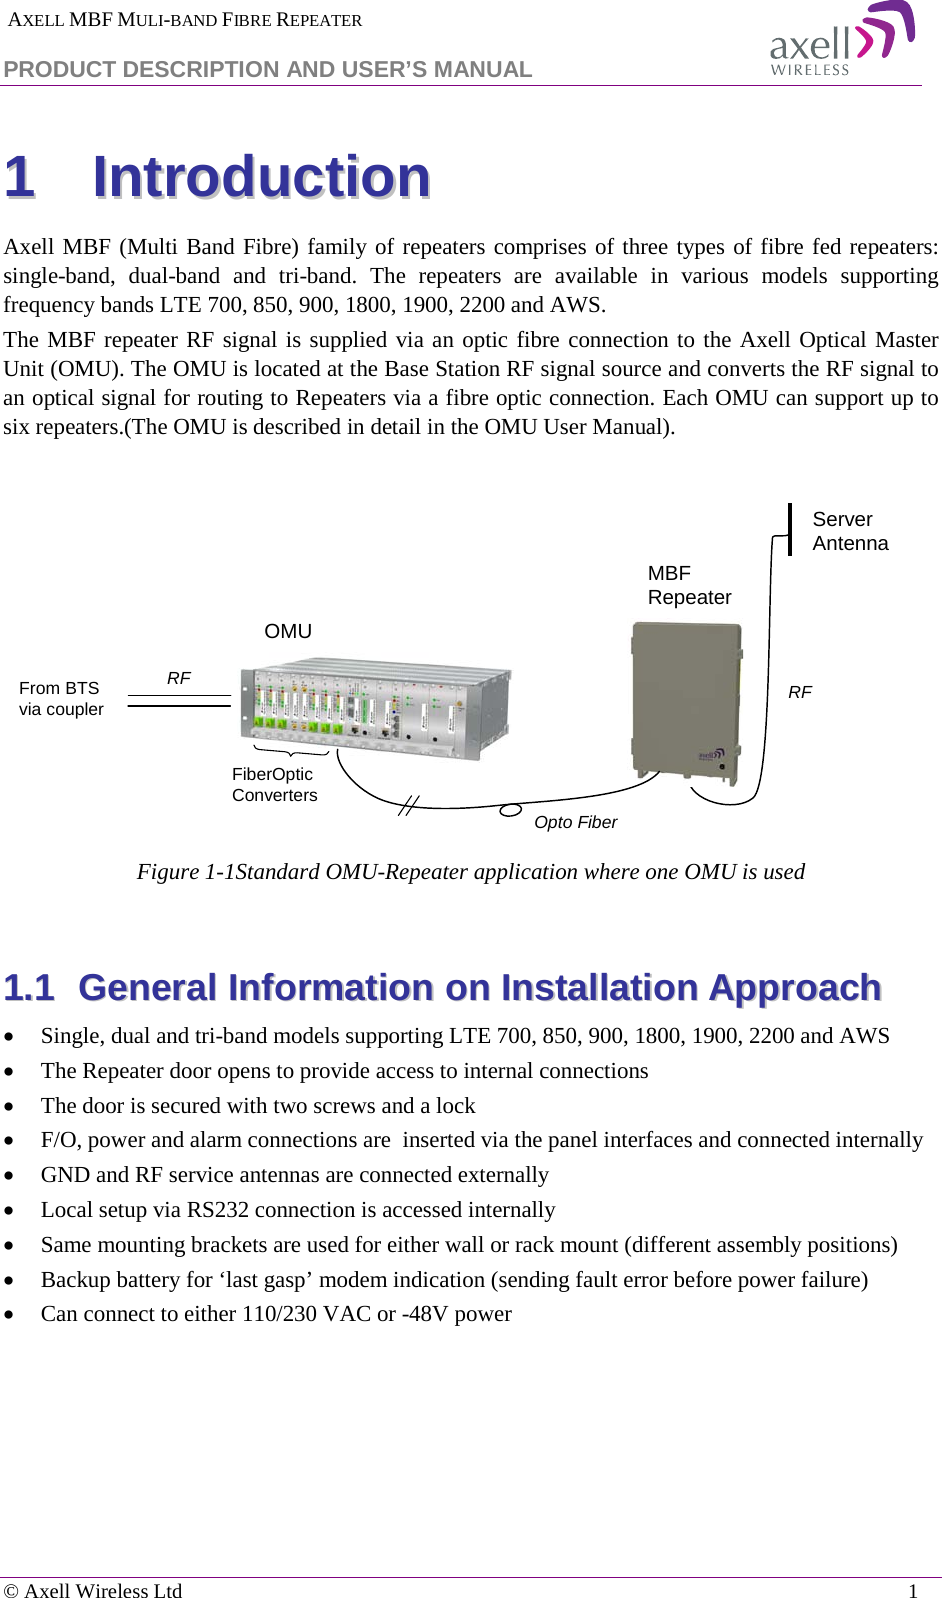  AXELL MBF MULI-BAND FIBRE REPEATER PRODUCT DESCRIPTION AND USER’S MANUAL  © Axell Wireless Ltd    1 11  IInnttrroodduuccttiioonn    Axell MBF (Multi Band Fibre) family of repeaters comprises of three types of fibre fed repeaters:  single-band, dual-band and tri-band.  The repeaters are available in various models supporting frequency bands LTE 700, 850, 900, 1800, 1900, 2200 and AWS.  The MBF repeater RF signal is supplied via an optic fibre connection to the Axell Optical Master Unit (OMU). The OMU is located at the Base Station RF signal source and converts the RF signal to an optical signal for routing to Repeaters via a fibre optic connection. Each OMU can support up to six repeaters.(The OMU is described in detail in the OMU User Manual).    Figure  1-1Standard OMU-Repeater application where one OMU is used  11..11  GGeenneerraall  IInnffoorrmmaattiioonn  oonn  IInnssttaallllaattiioonn  AApppprrooaacchh  • Single, dual and tri-band models supporting LTE 700, 850, 900, 1800, 1900, 2200 and AWS • The Repeater door opens to provide access to internal connections           • The door is secured with two screws and a lock • F/O, power and alarm connections are  inserted via the panel interfaces and connected internally • GND and RF service antennas are connected externally • Local setup via RS232 connection is accessed internally • Same mounting brackets are used for either wall or rack mount (different assembly positions) • Backup battery for ‘last gasp’ modem indication (sending fault error before power failure) • Can connect to either 110/230 VAC or -48V power    RFMBF RepeaterOpto FiberRFFiberOpticConvertersServer AntennaFrom BTS via couplerOMU